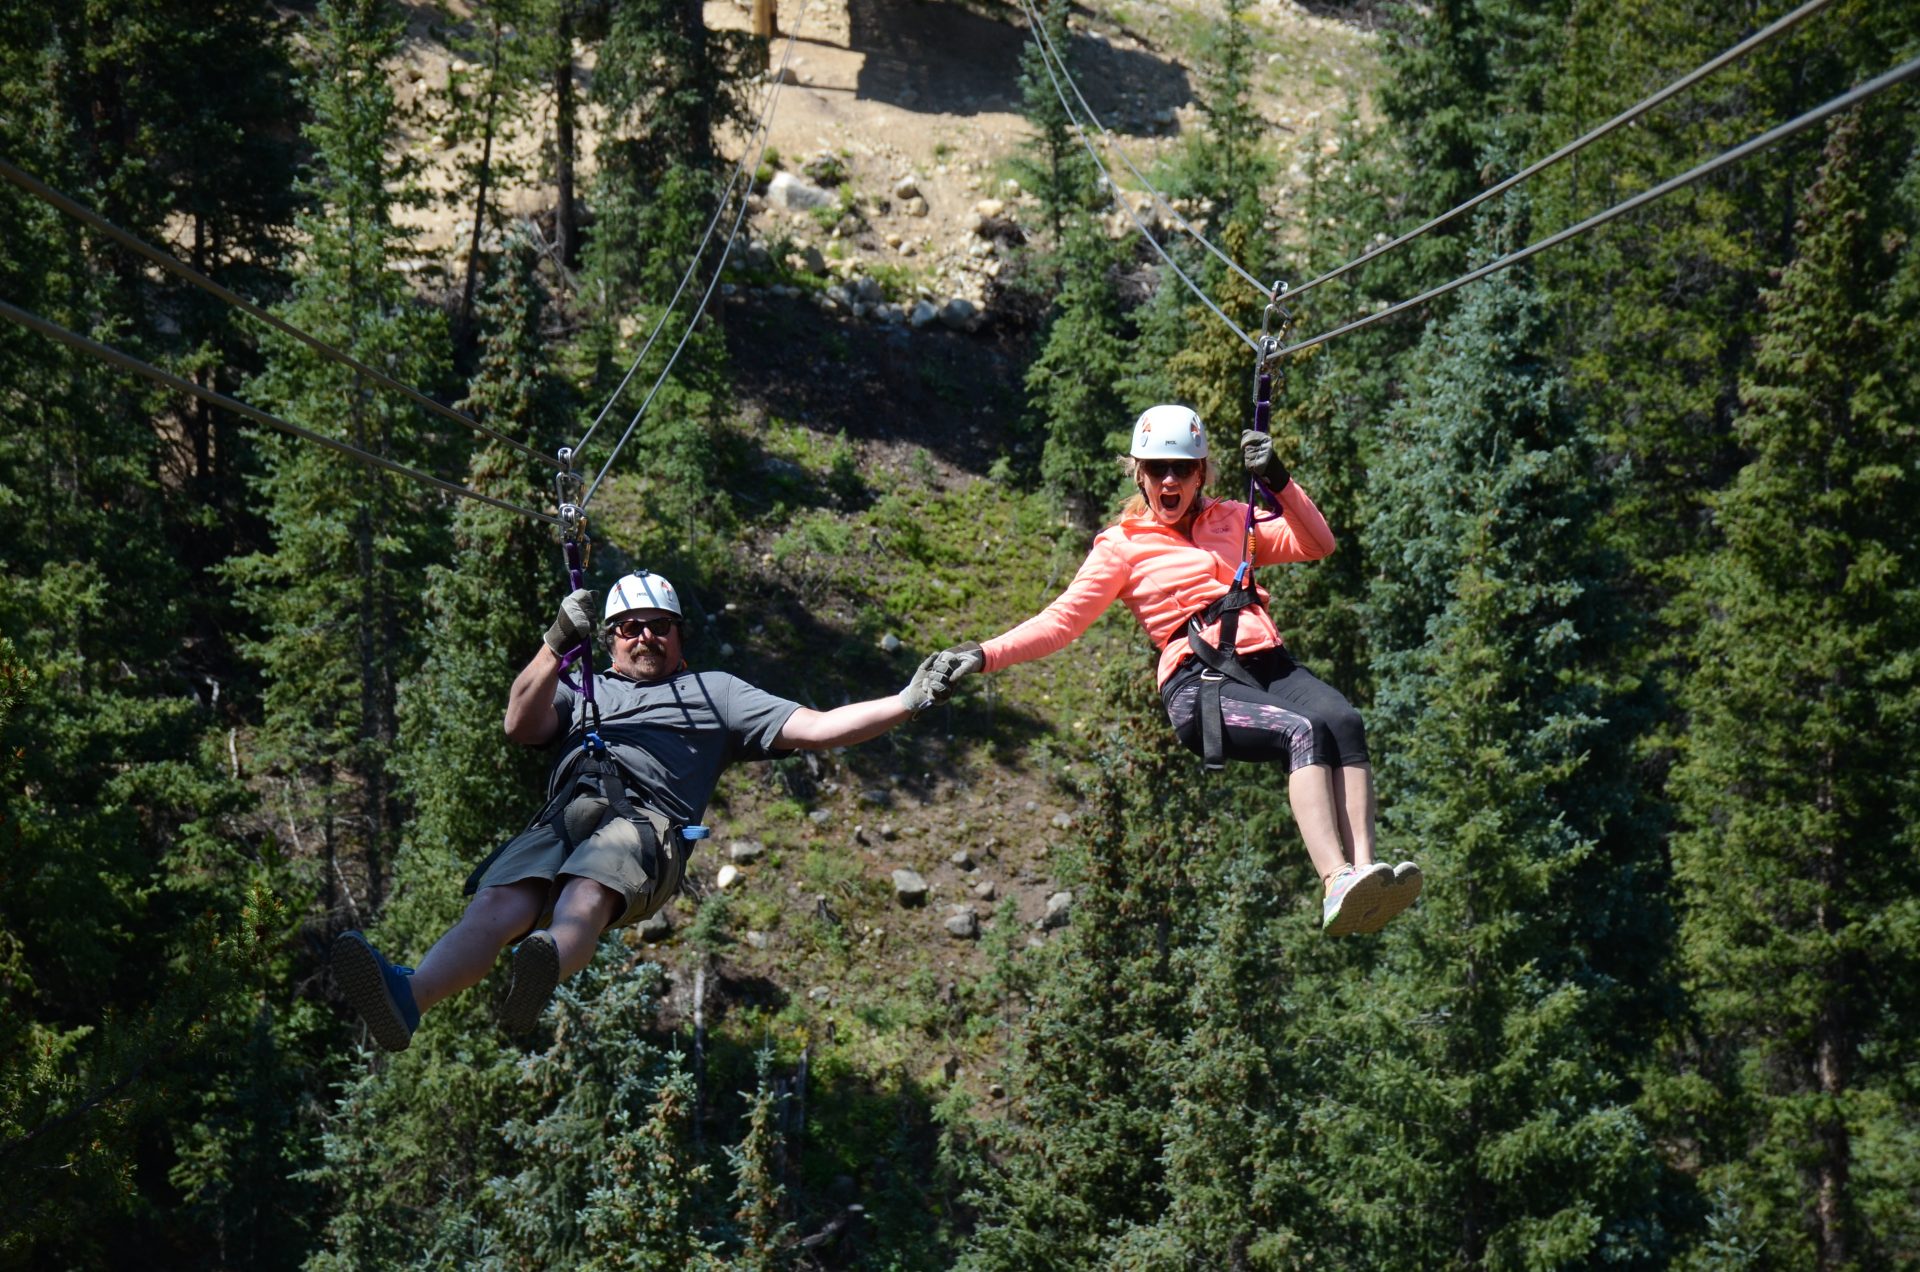 A couple engaged in zip-lining amid one of our Big Bend river tours